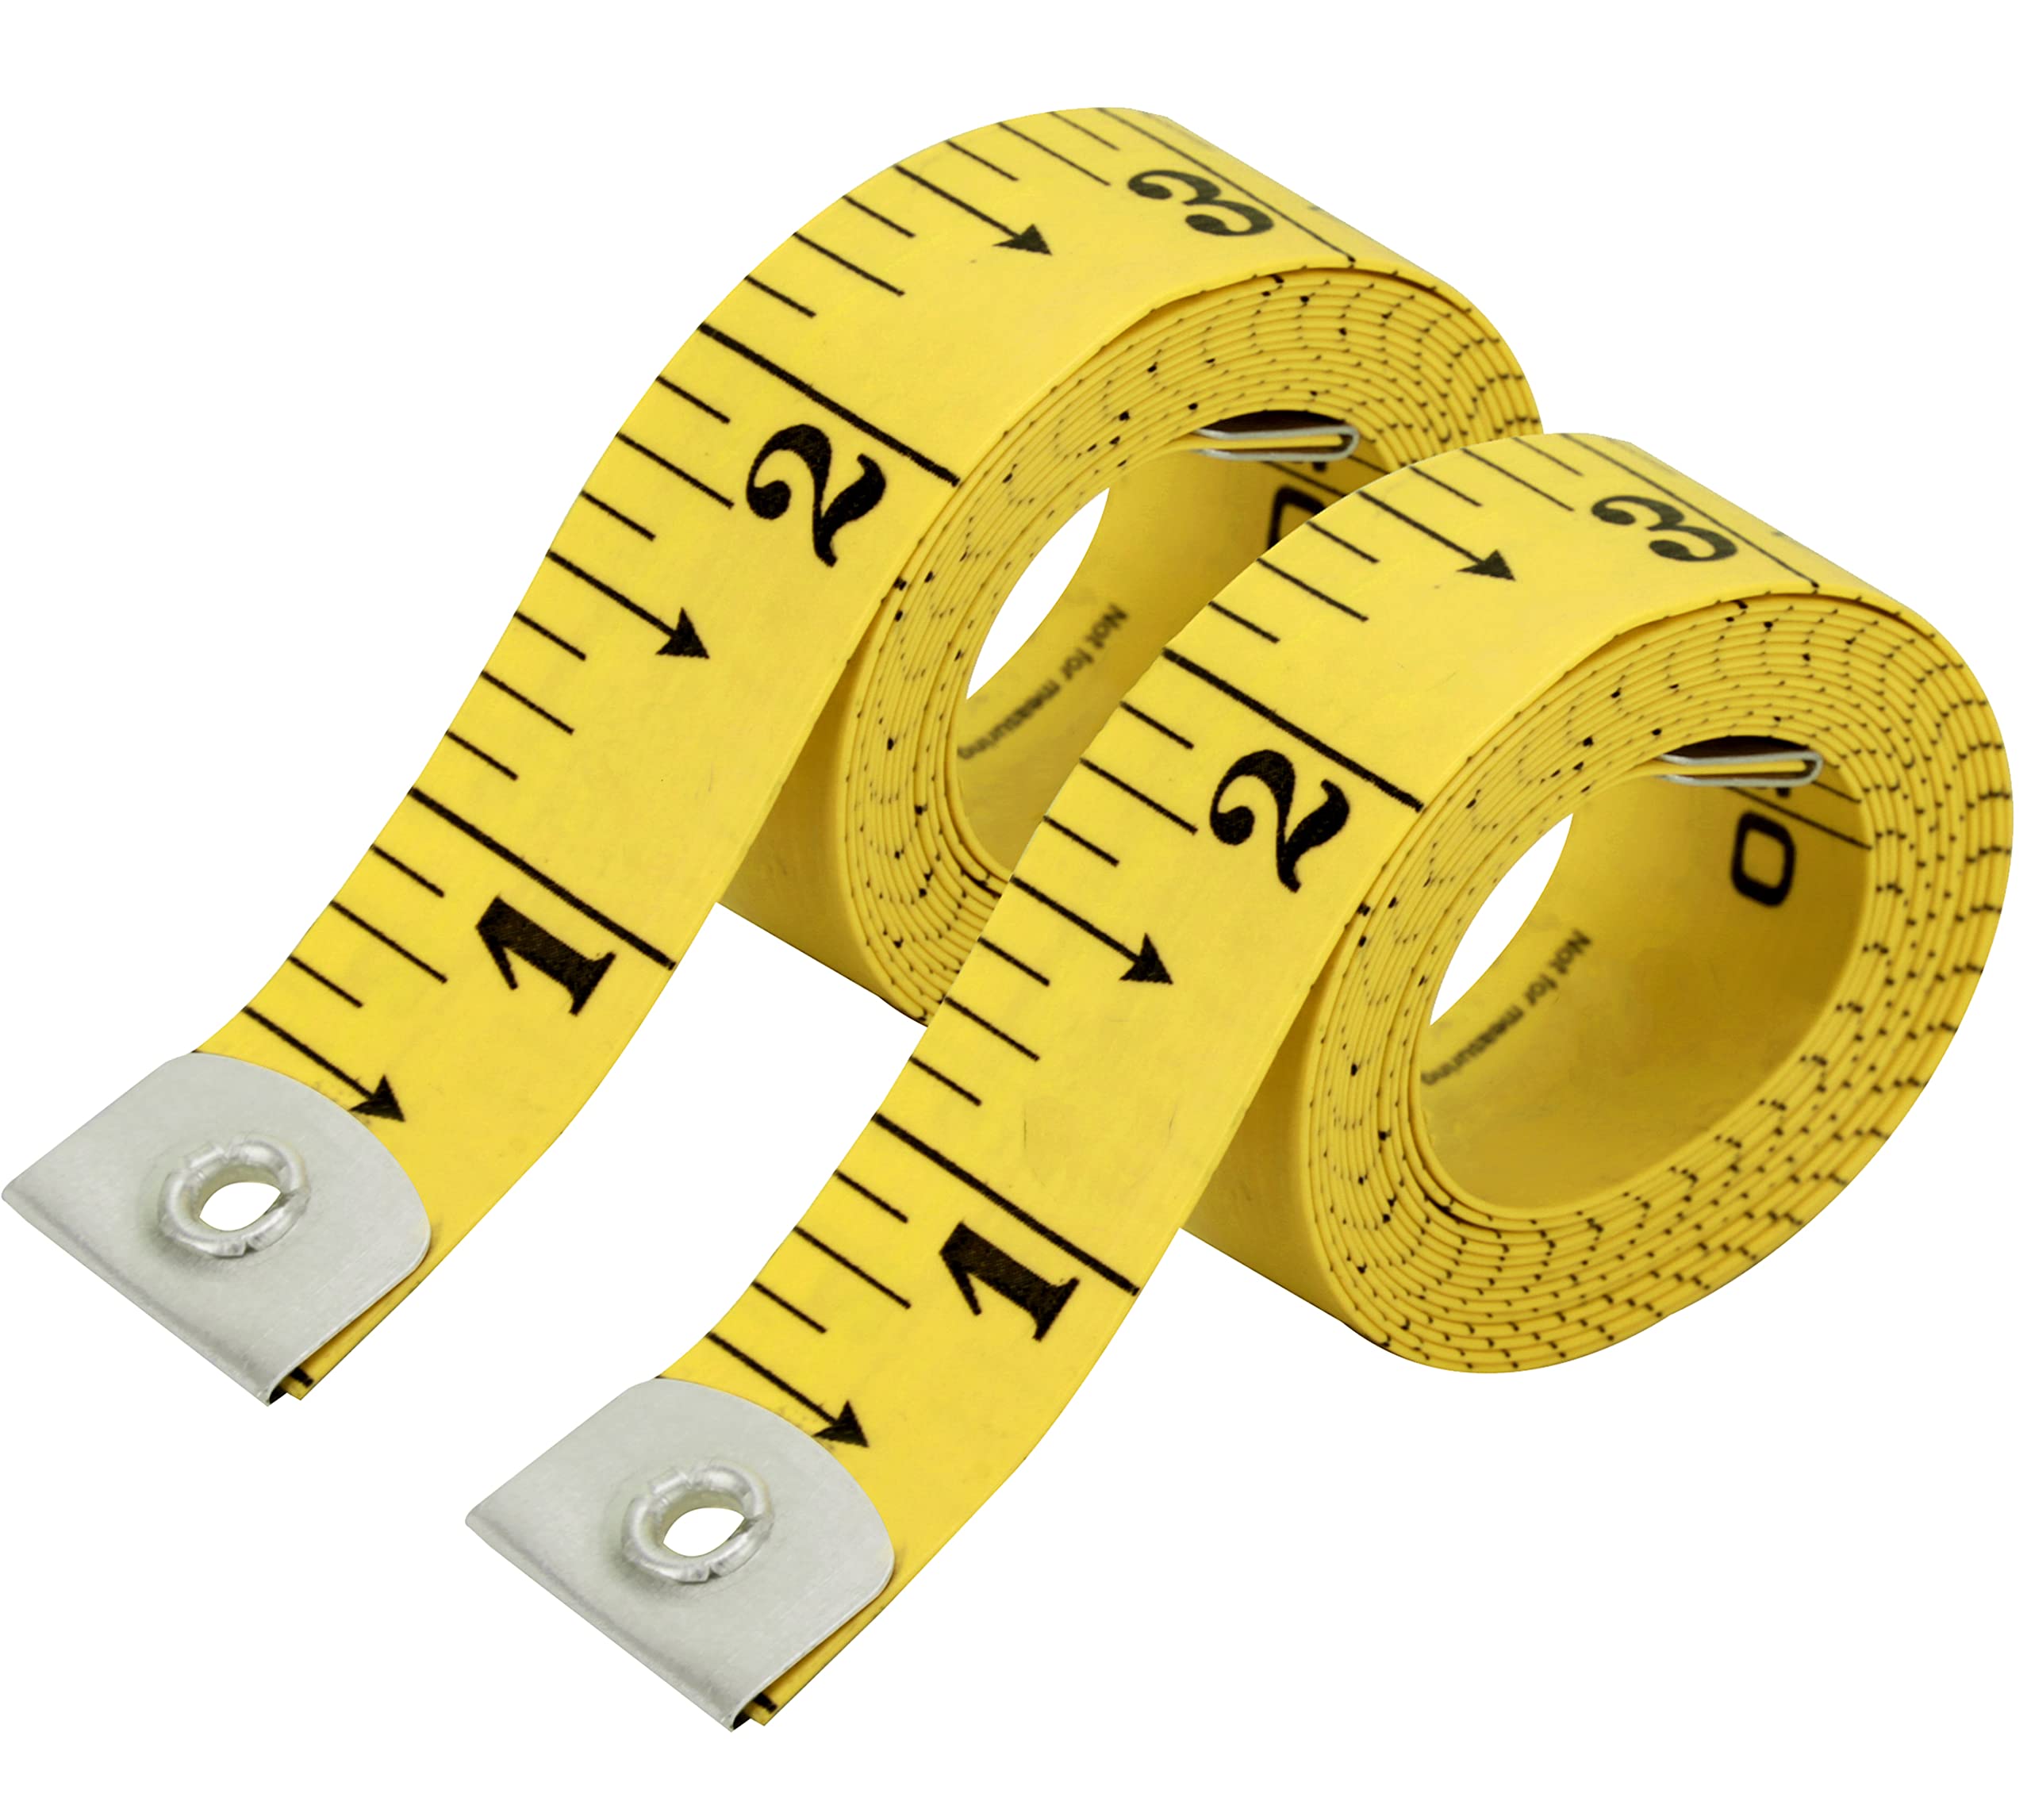 Coloured Flexible Tape Measure with Case